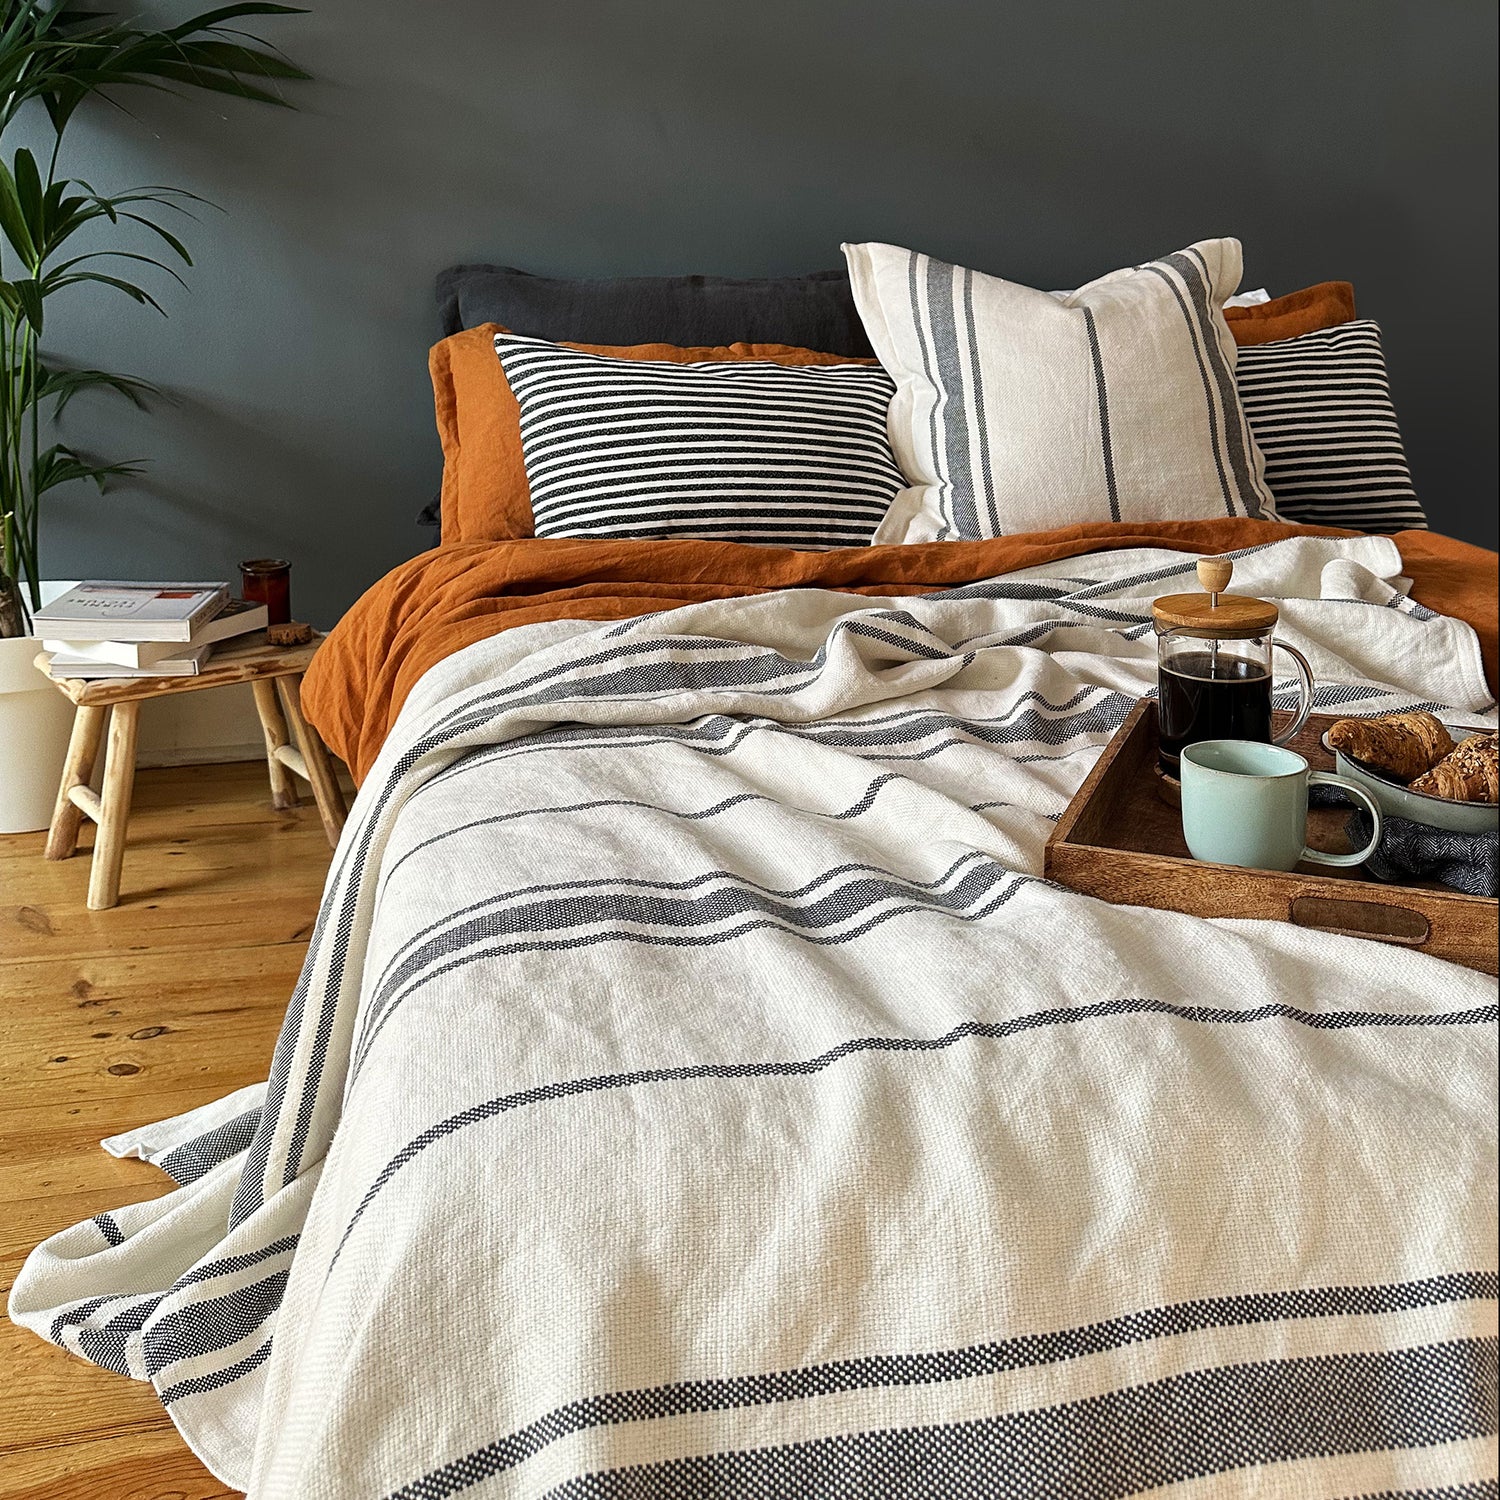 linen-heavyweight-blankets-and-bedding-biggs-and-hill